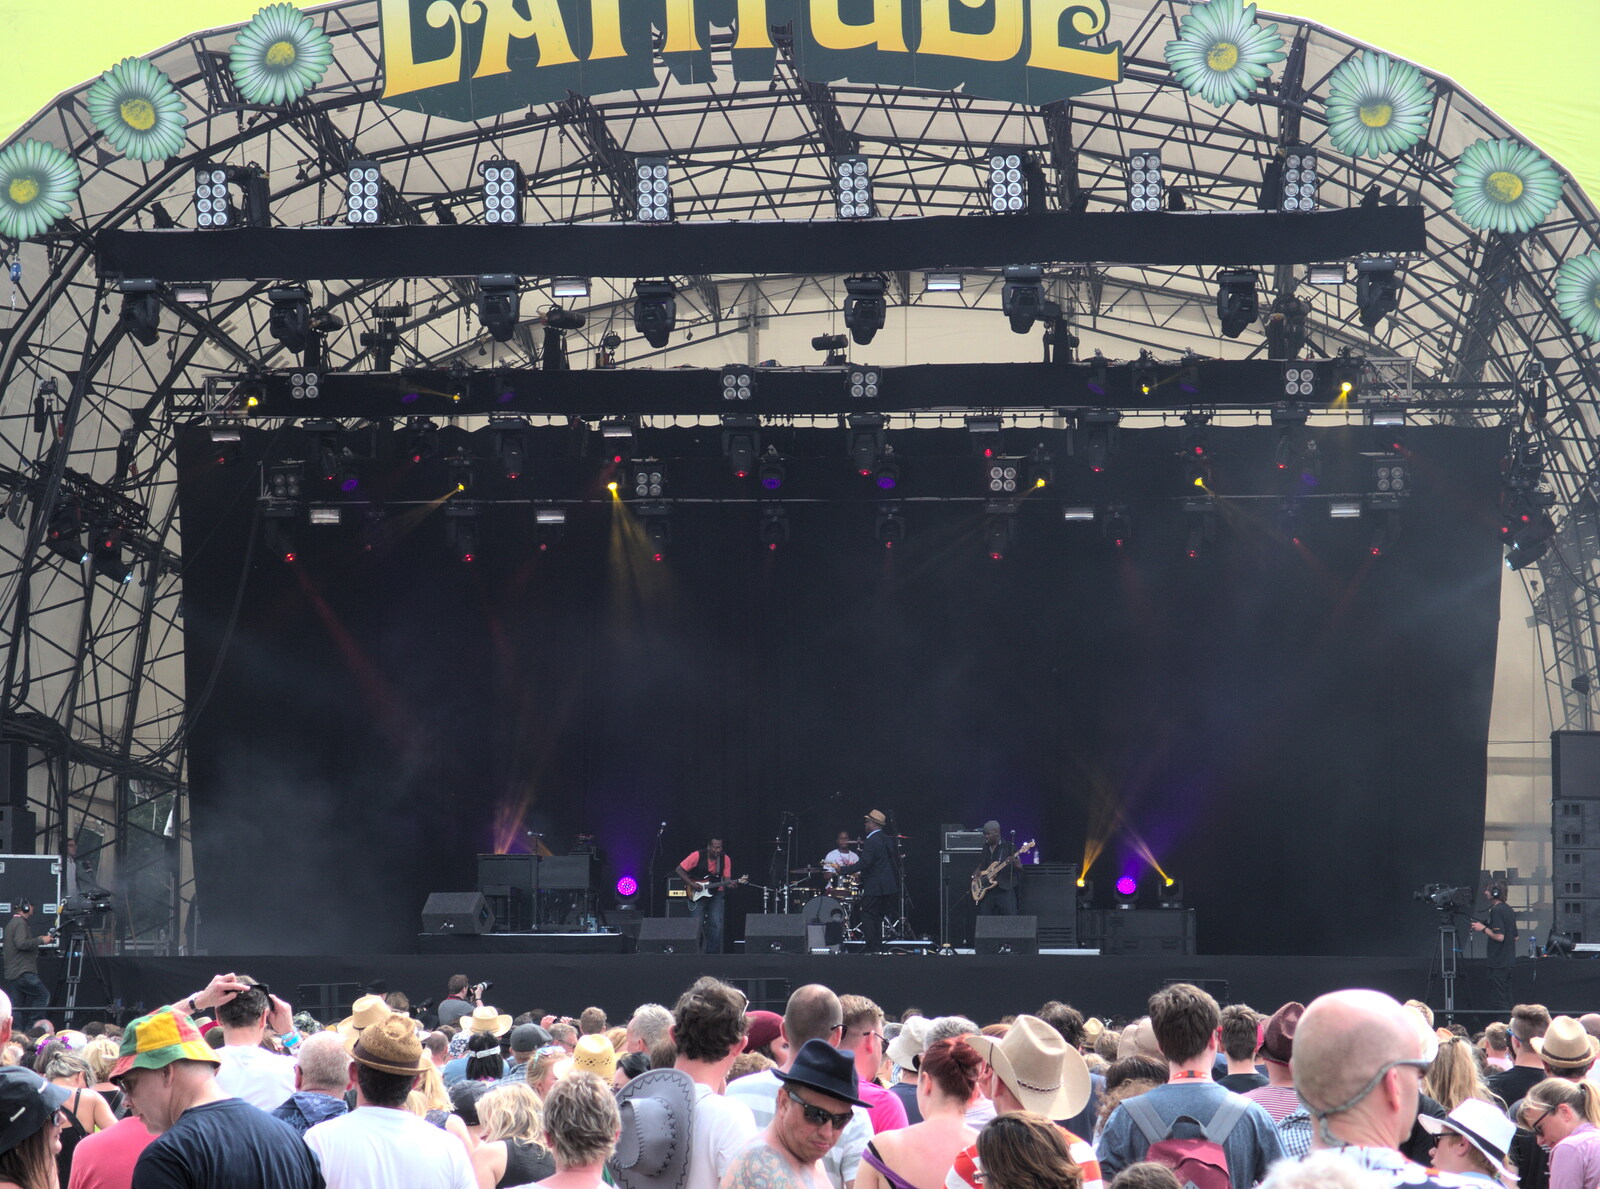 The main stage has Booker T. Jones, out of the MGs from Latitude Festival, Henham Park, Southwold, Suffolk - 17th July 2014